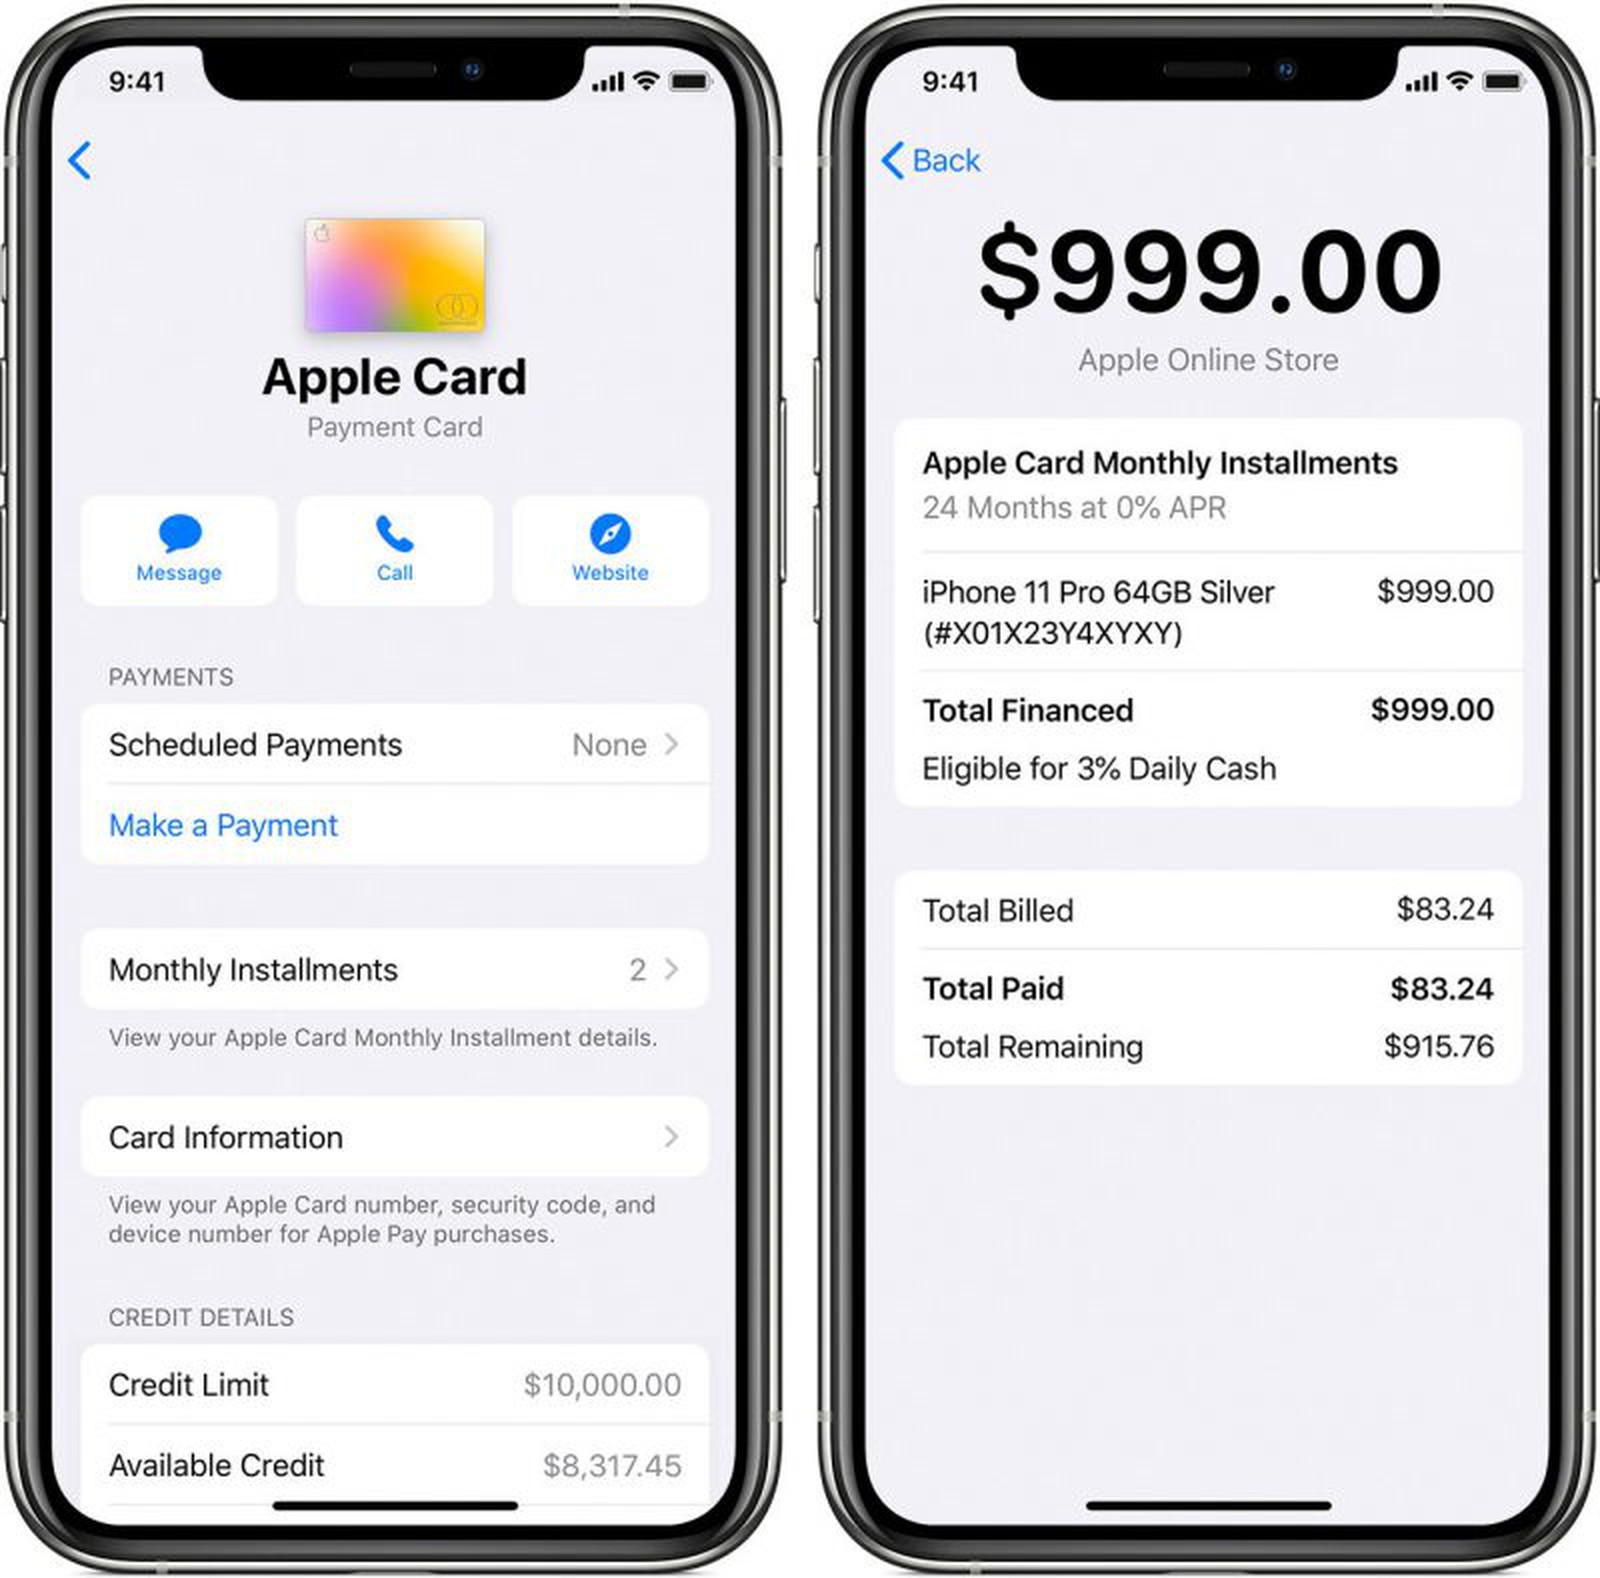 Apple Card Monthly Installments How the InterestFree iPhone Financing